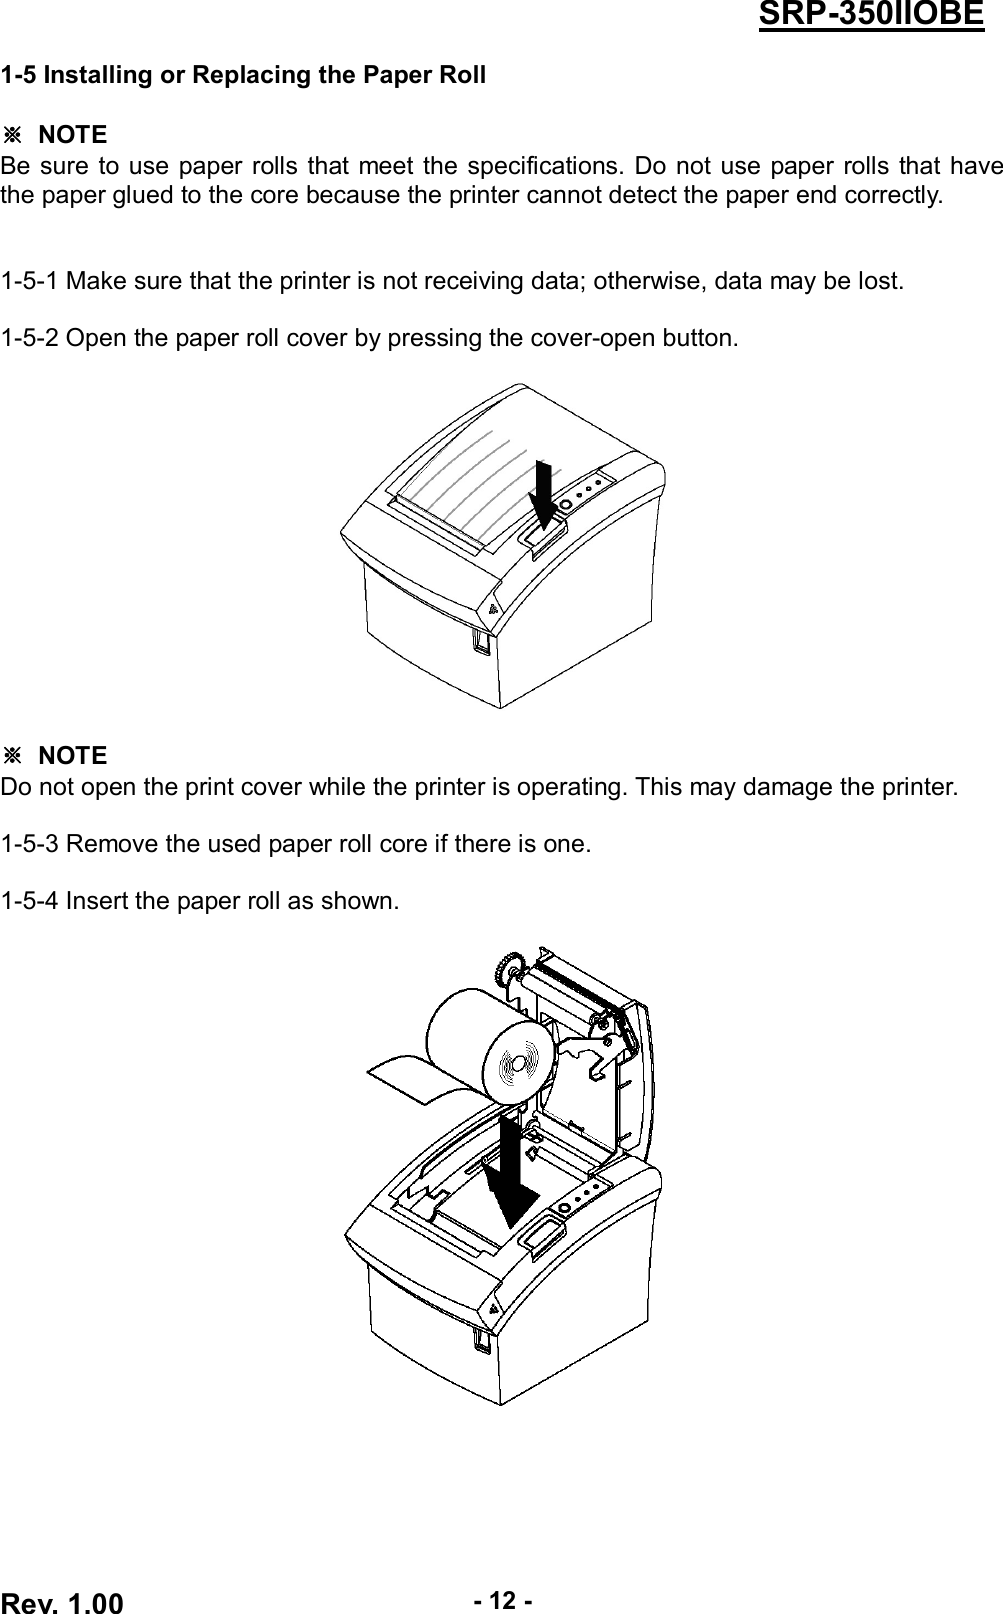  Rev. 1.00 - 12 - SRP-350IIOBE 1-5 Installing or Replacing the Paper Roll  ※  NOTE Be sure to use paper rolls that meet the specifications. Do not use paper  rolls  that have the paper glued to the core because the printer cannot detect the paper end correctly.   1-5-1 Make sure that the printer is not receiving data; otherwise, data may be lost.  1-5-2 Open the paper roll cover by pressing the cover-open button.      ※  NOTE Do not open the print cover while the printer is operating. This may damage the printer.  1-5-3 Remove the used paper roll core if there is one.  1-5-4 Insert the paper roll as shown.   